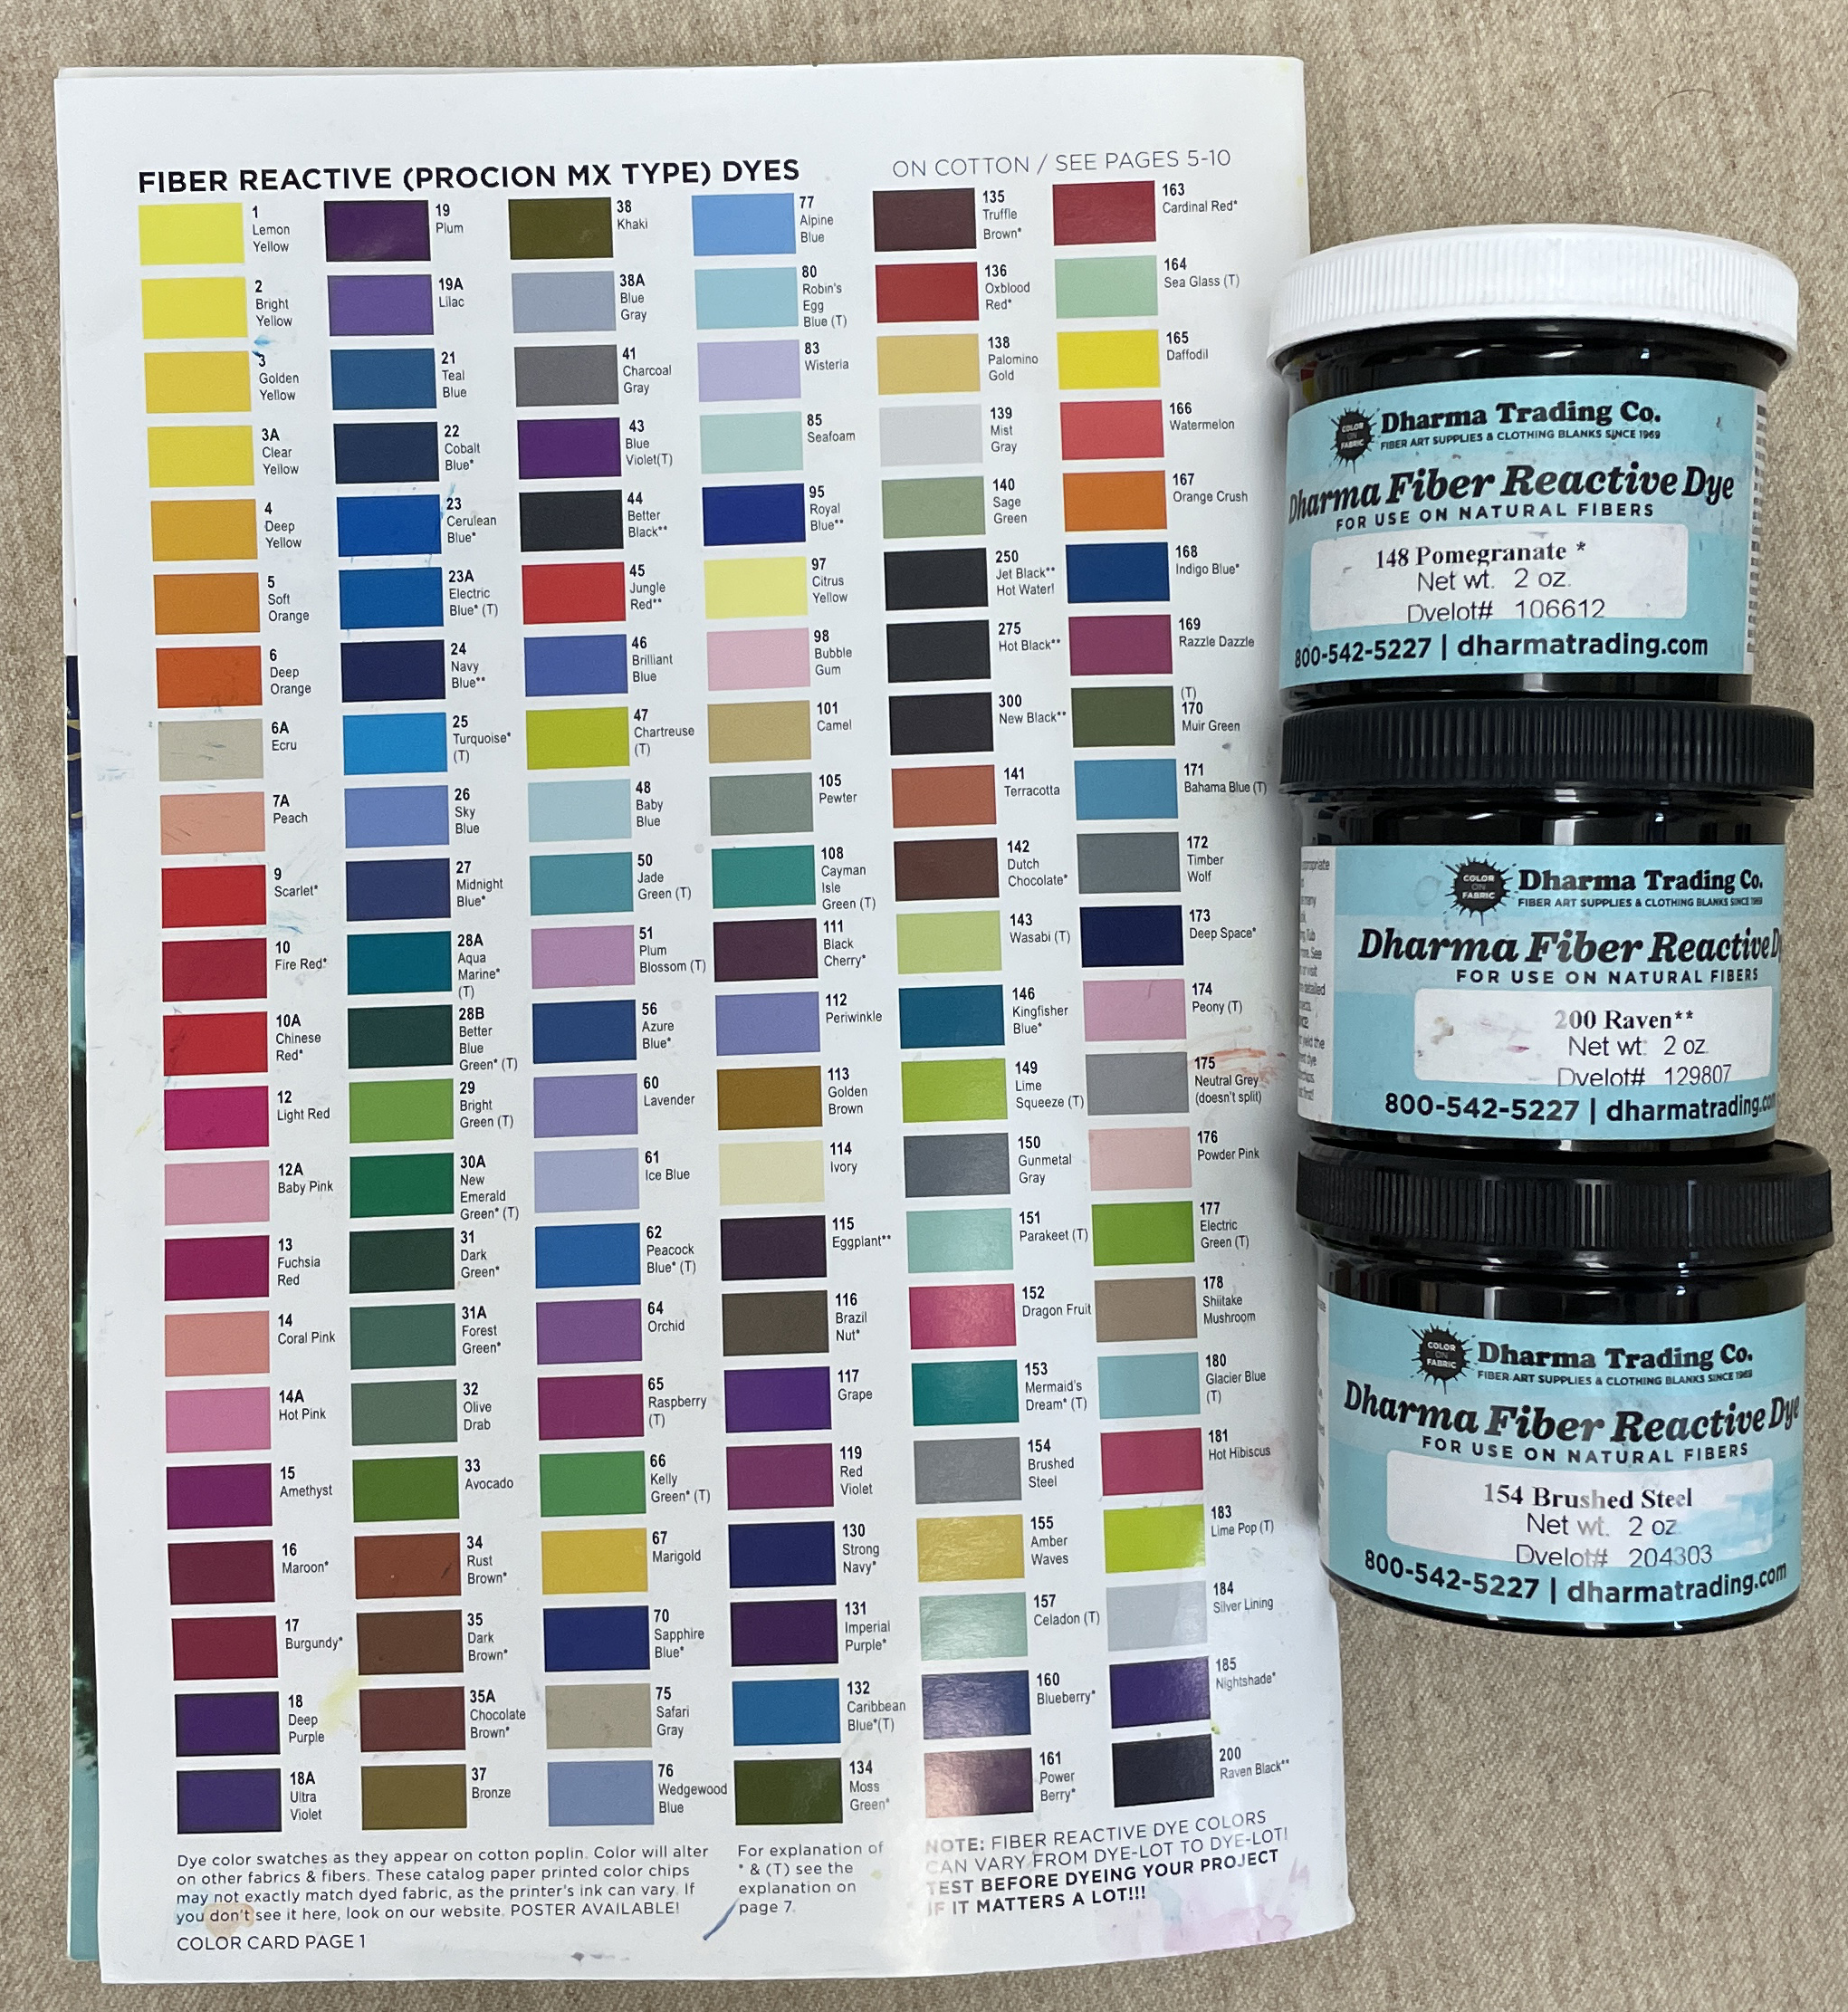 How Much Dye Powder Should You Use For Ice Dyeing? - Mythic Seam